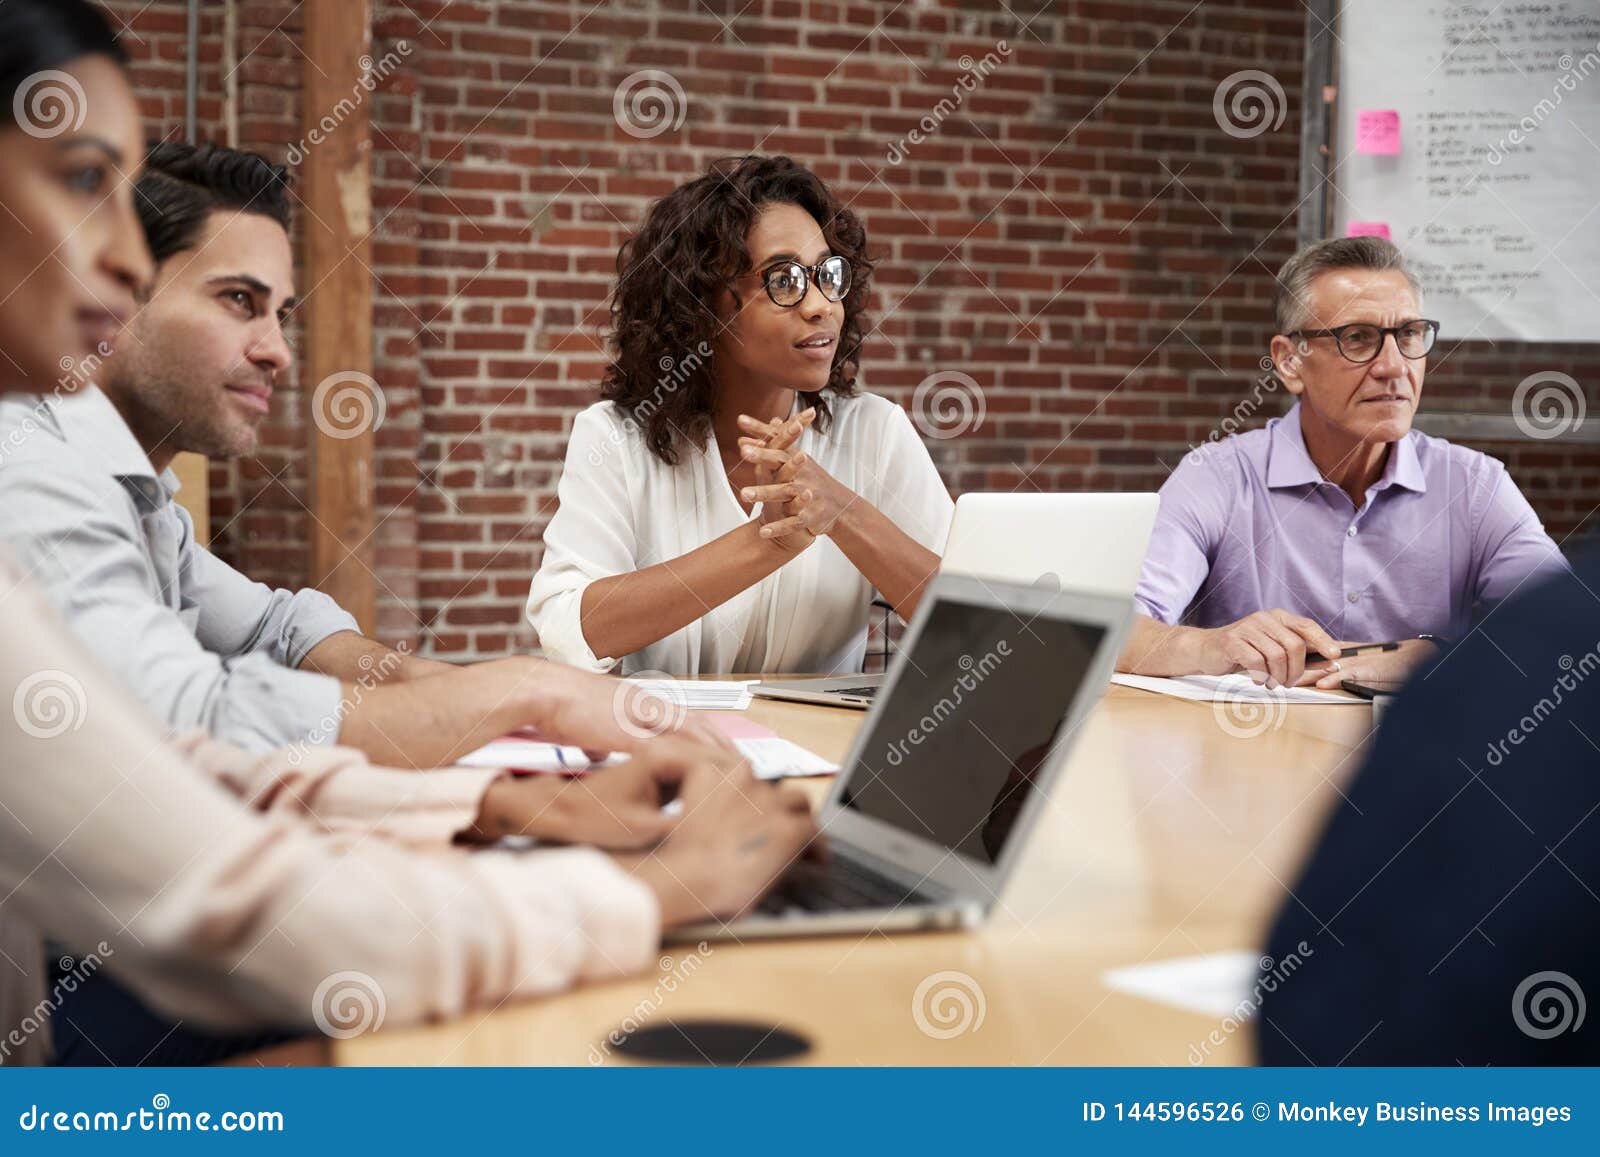 businesswoman leading office meeting of colleagues sitting around table